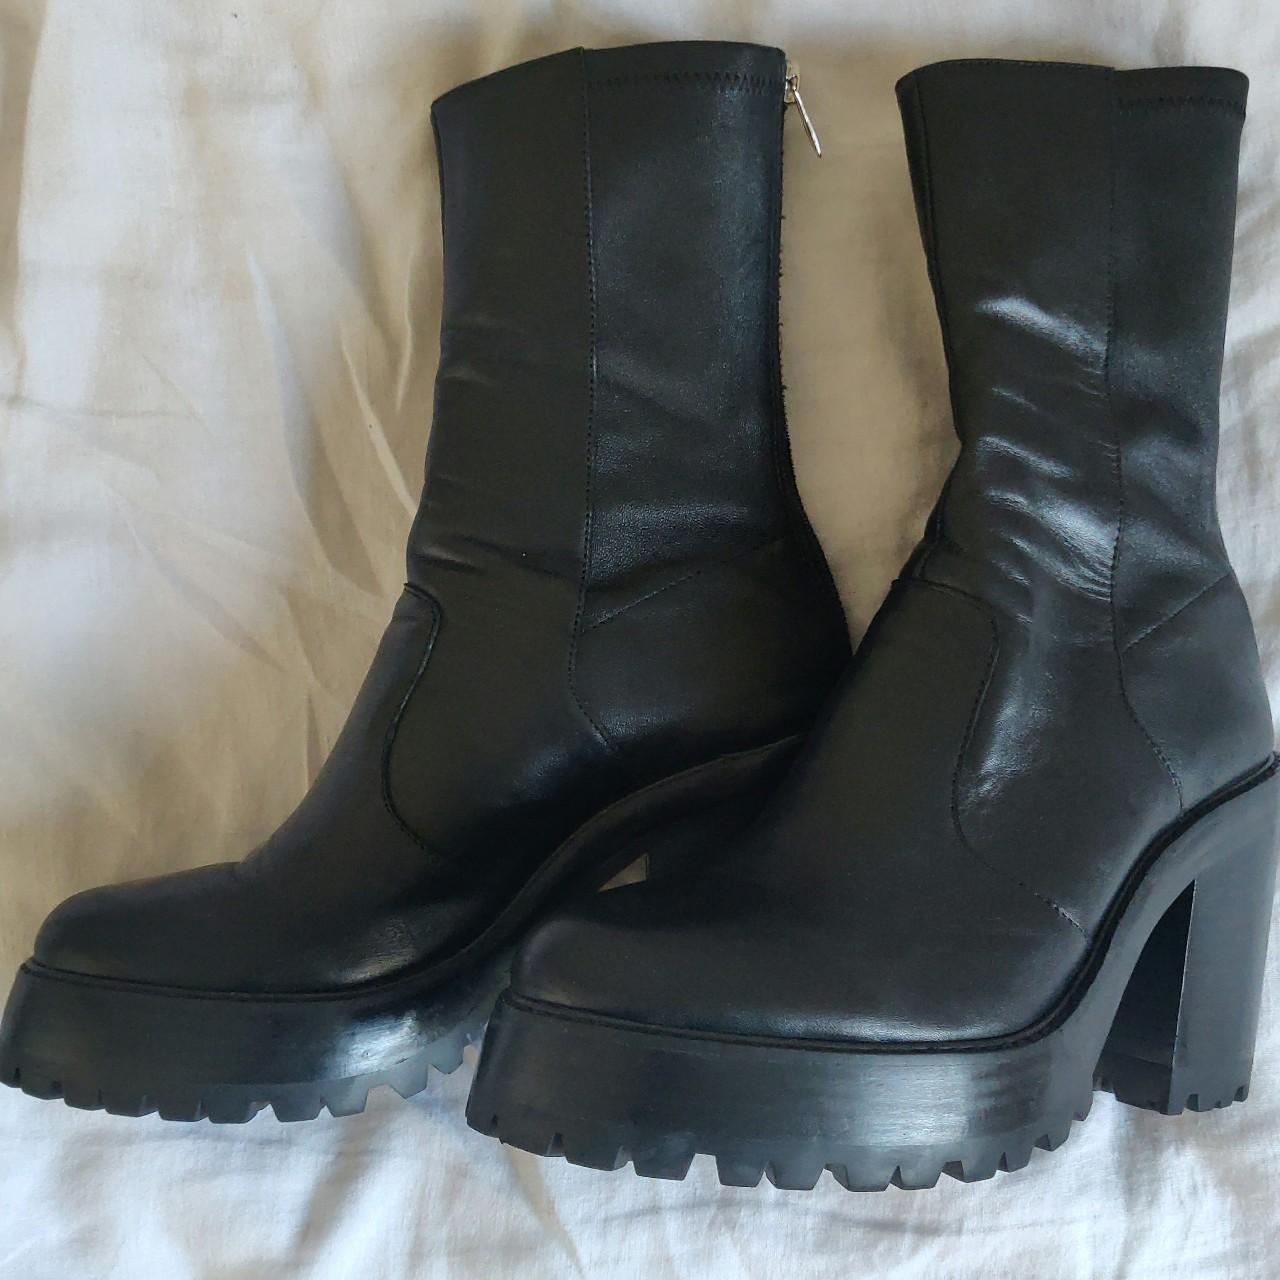 SYRO AMI boots. Designed for men, so they have a... - Depop